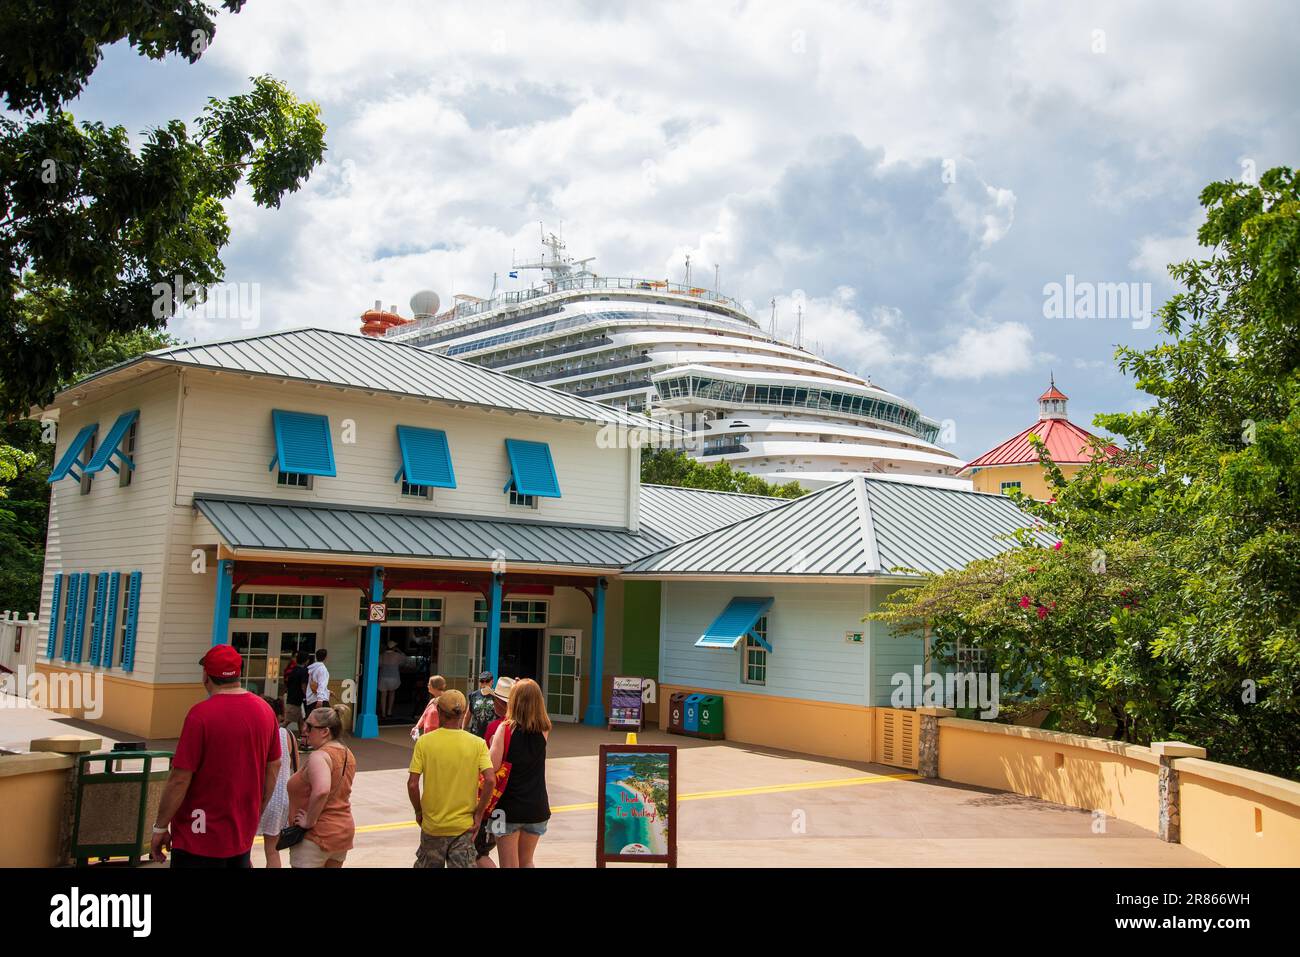 A diverse group of people enjoying a sunny day at the Carnival Vista cruise port in Roatan, Honduras Stock Photo